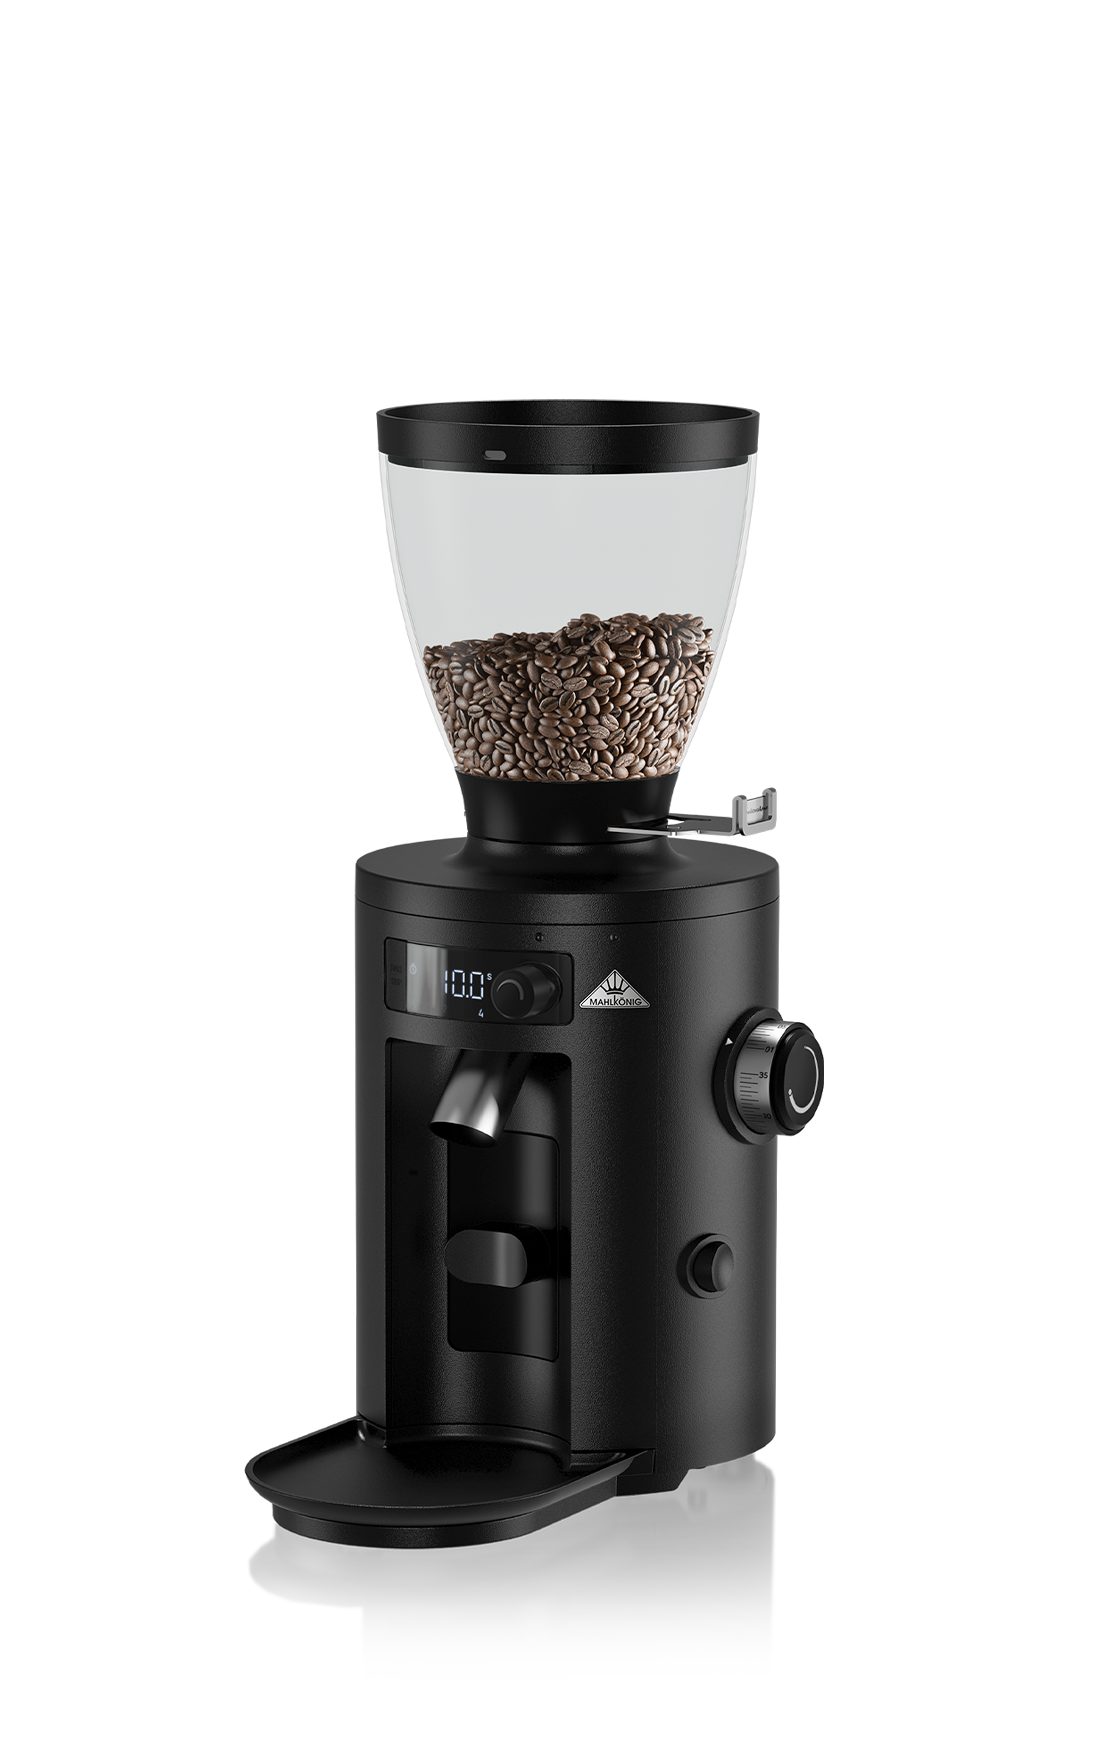 Choosing and Using a Coffee Grinder